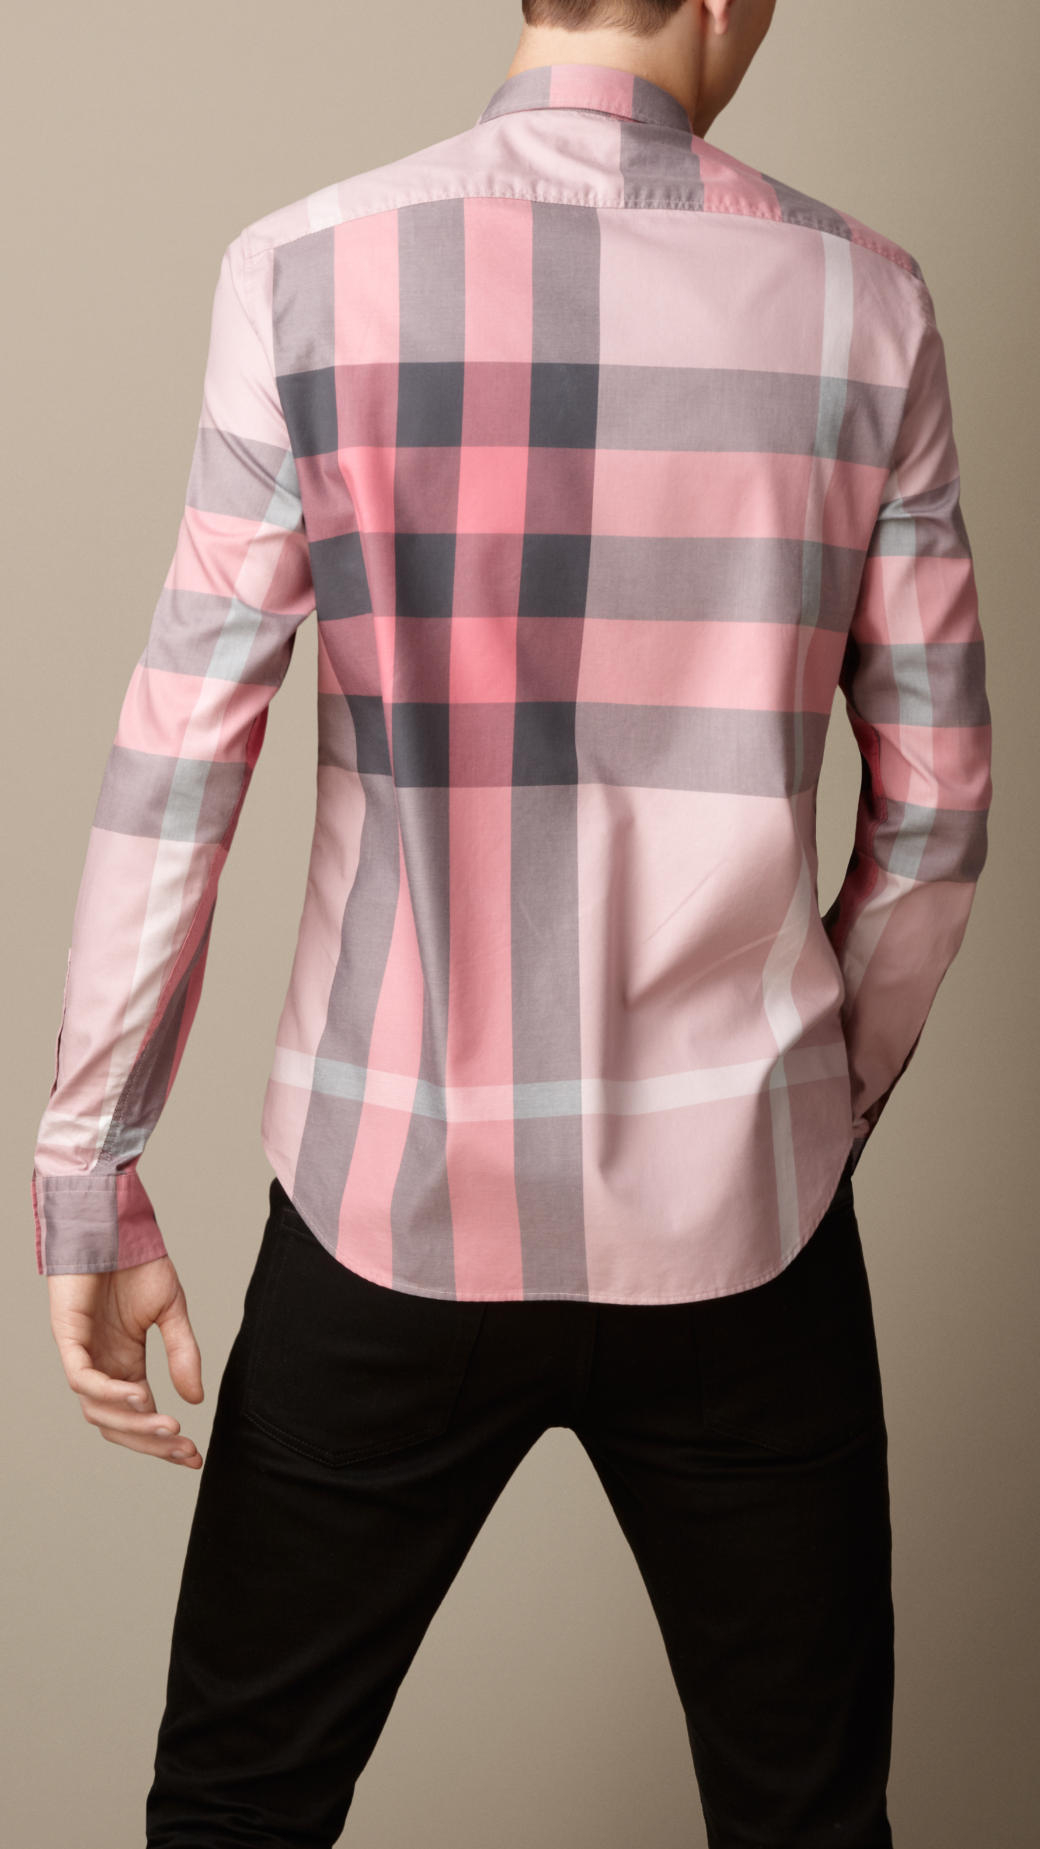 Lyst - Burberry Giant Exploded Check Cotton Shirt in Pink for Men